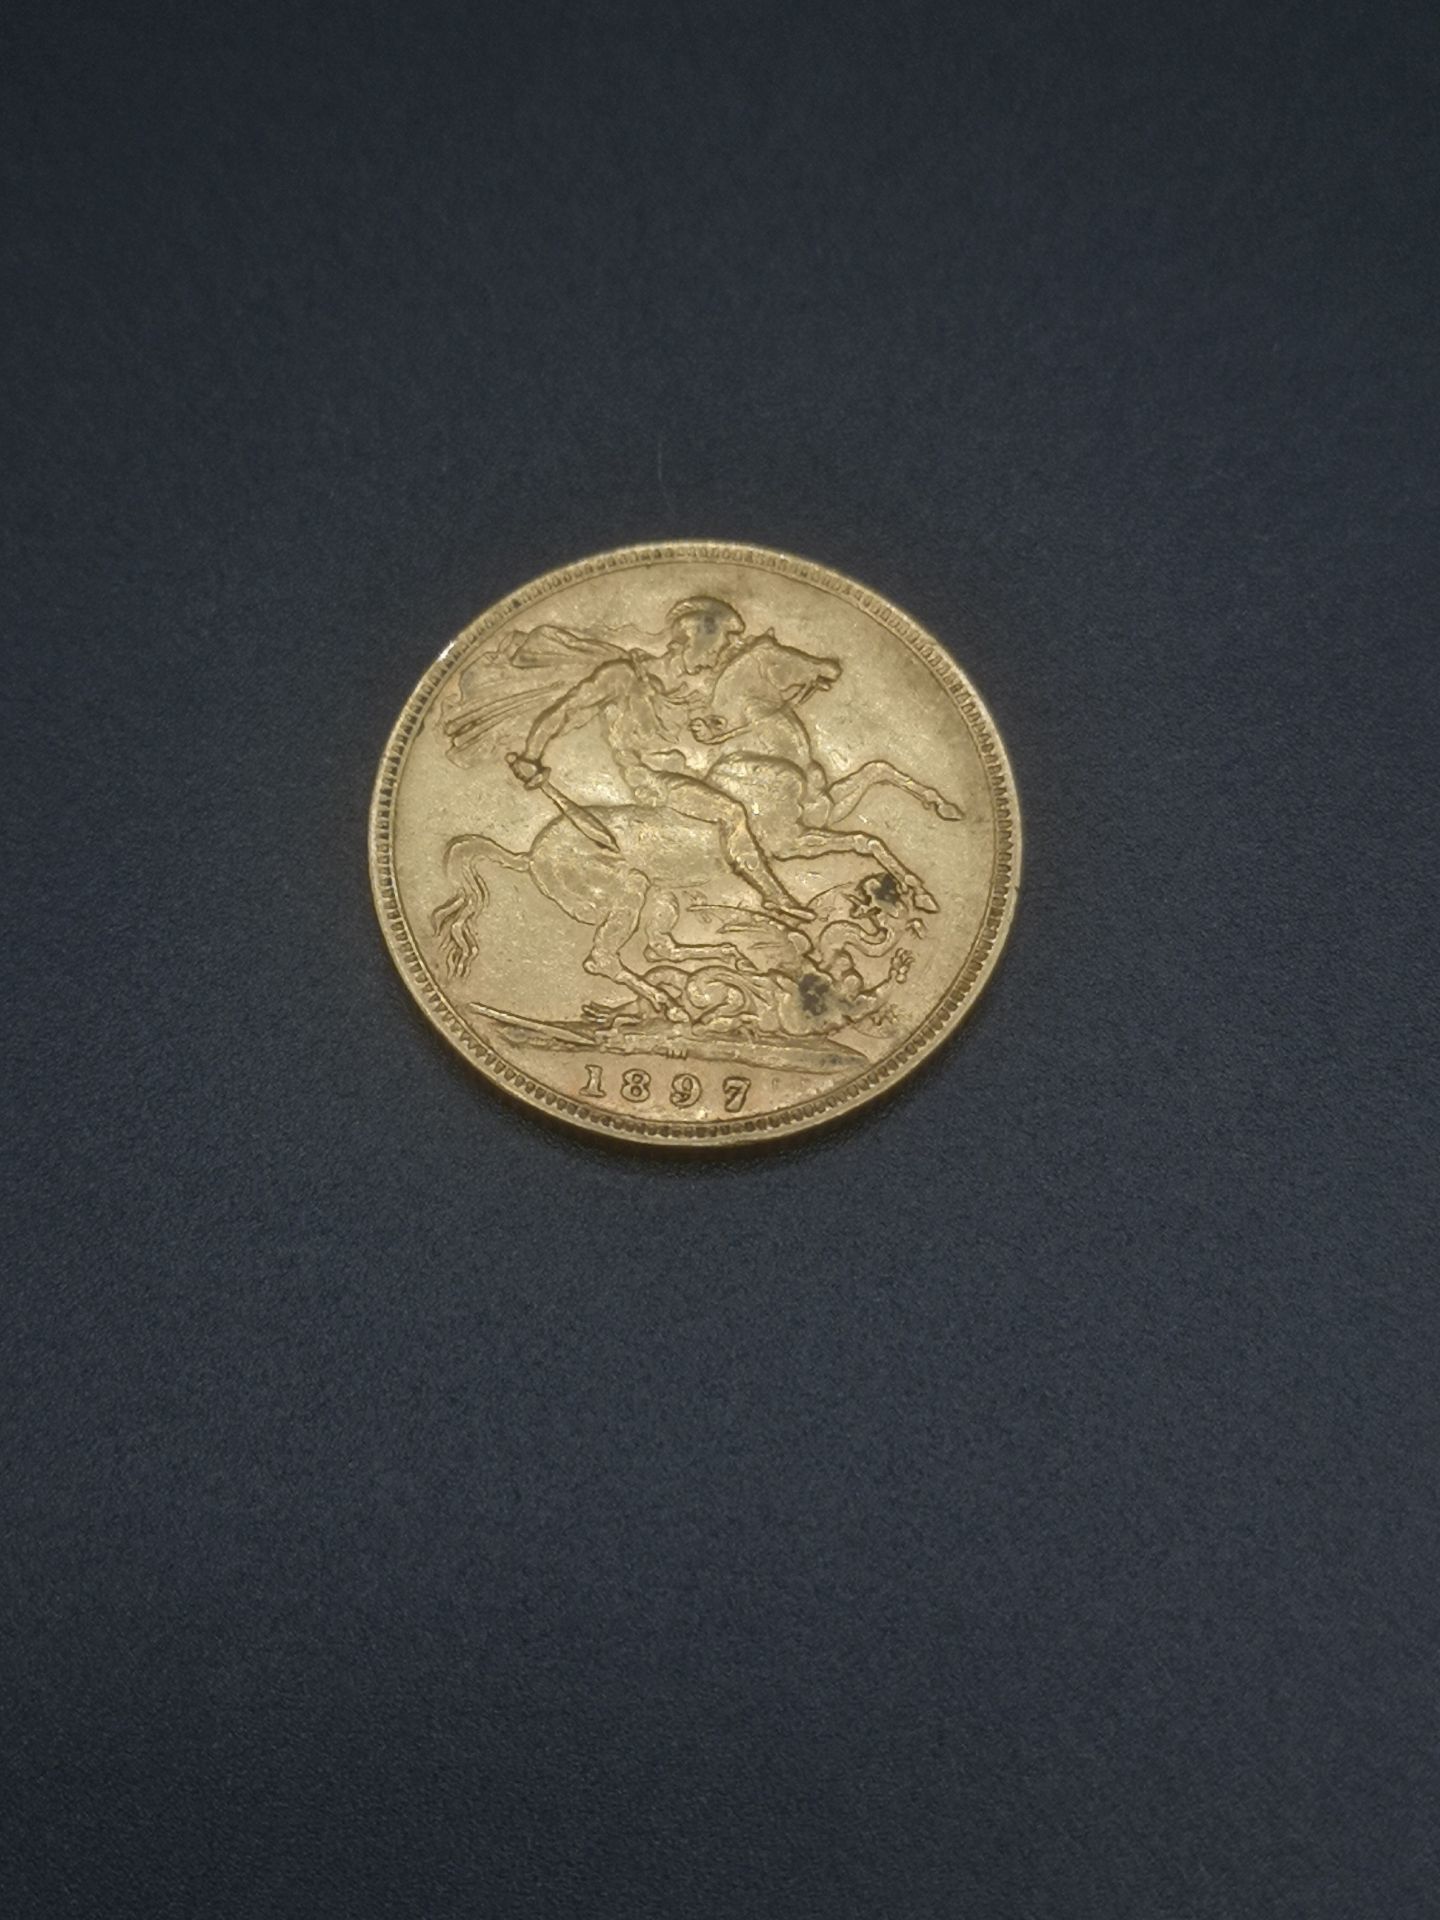 Victorian gold sovereign 1897 - Image 4 of 4